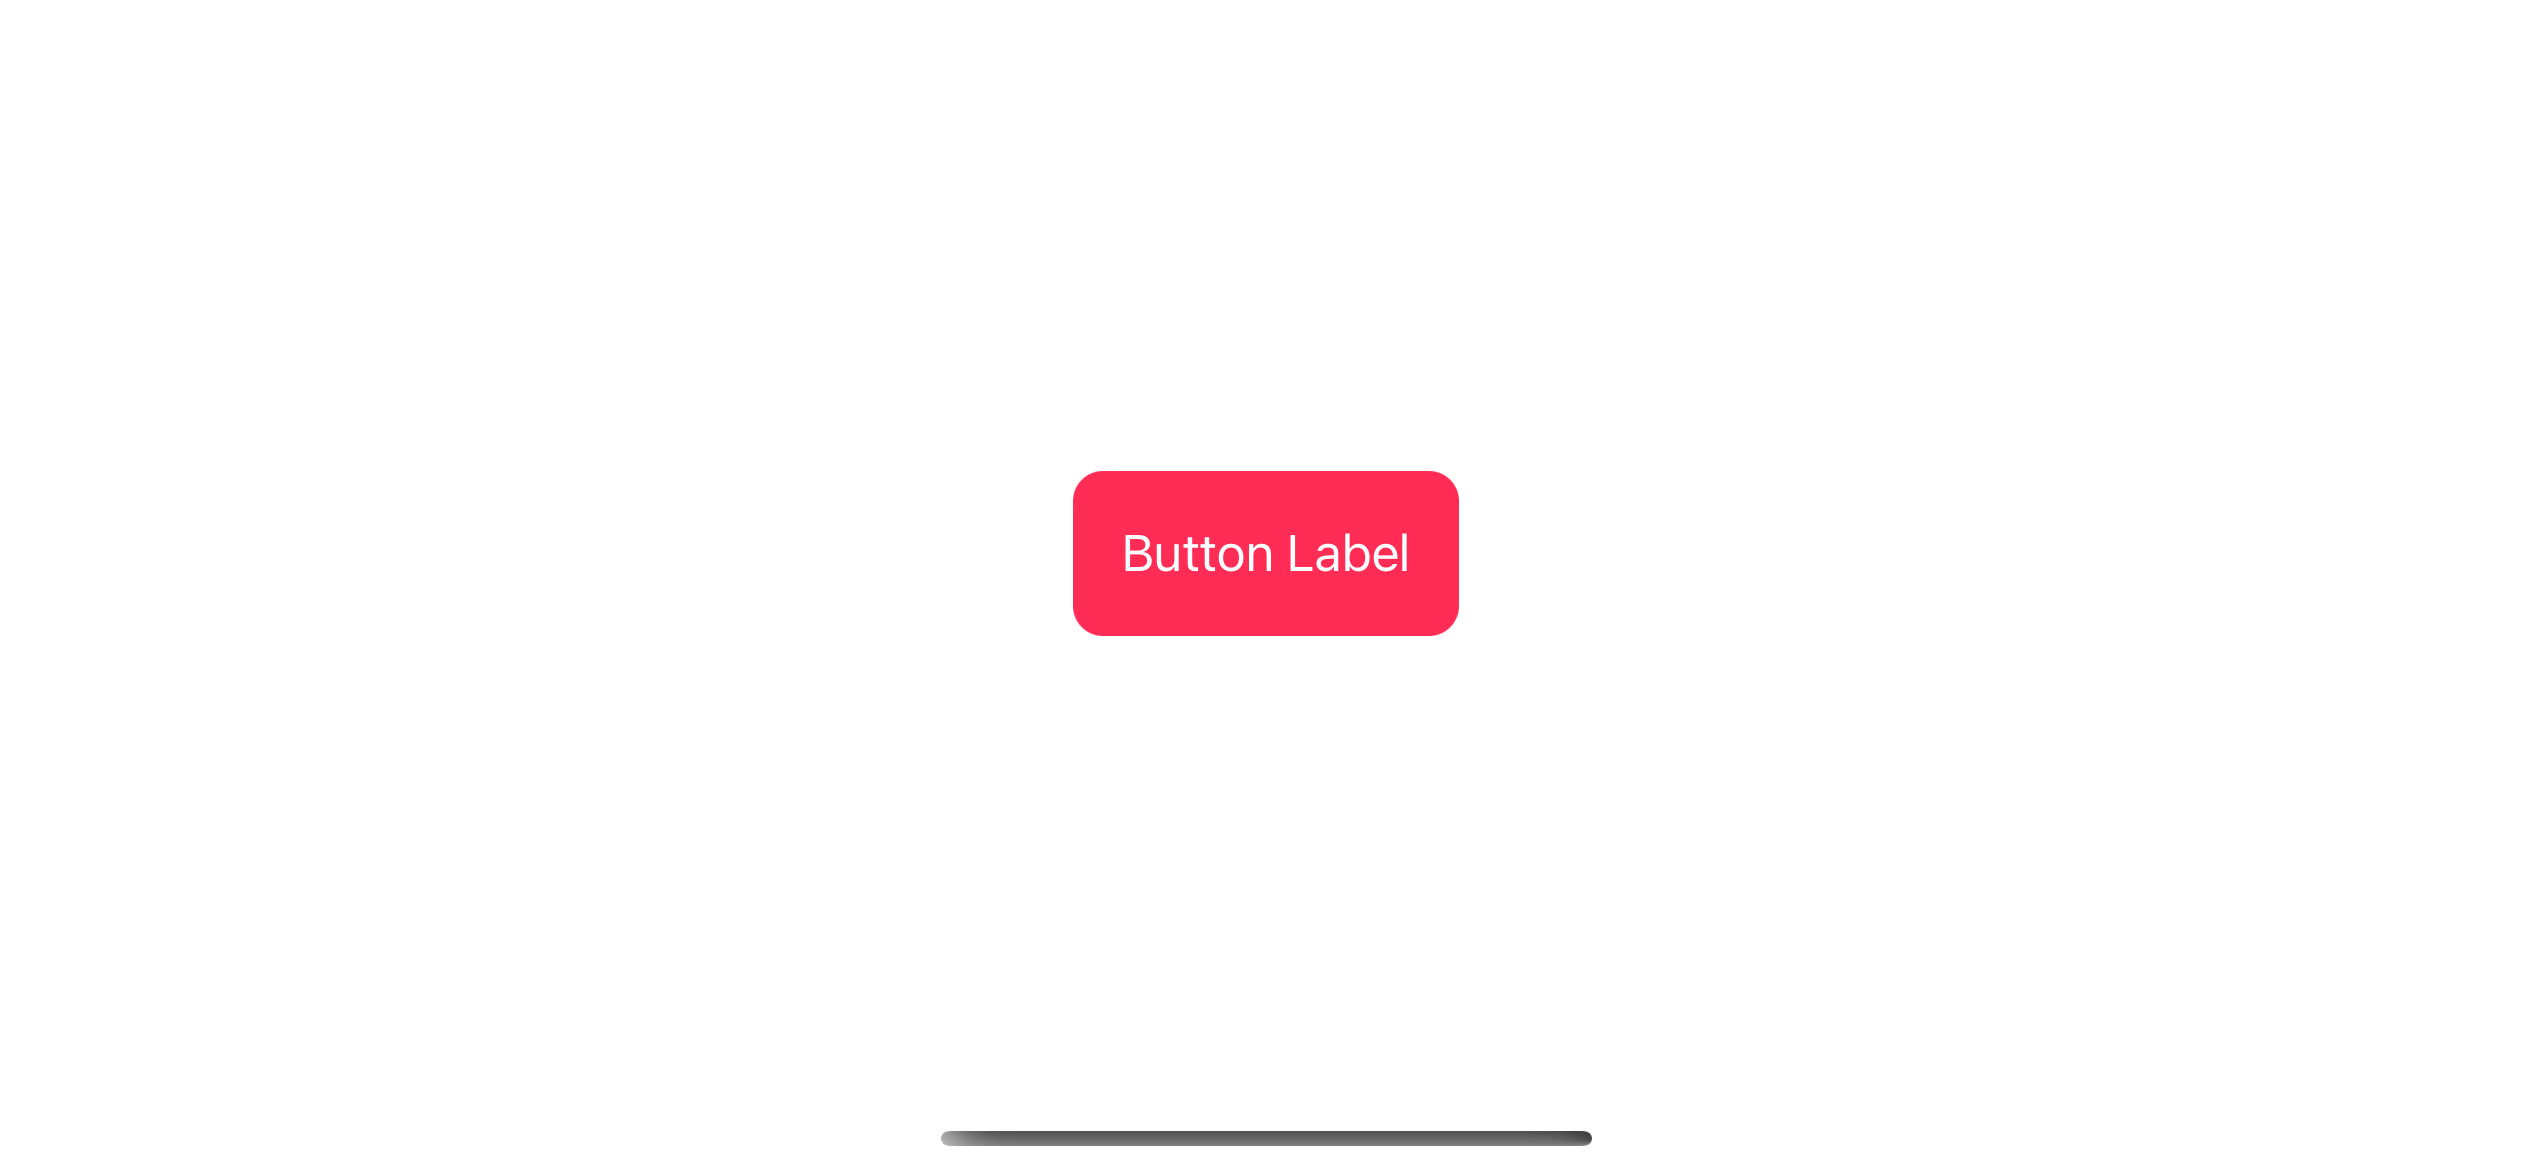 Use the background modifier to change the button's background color.